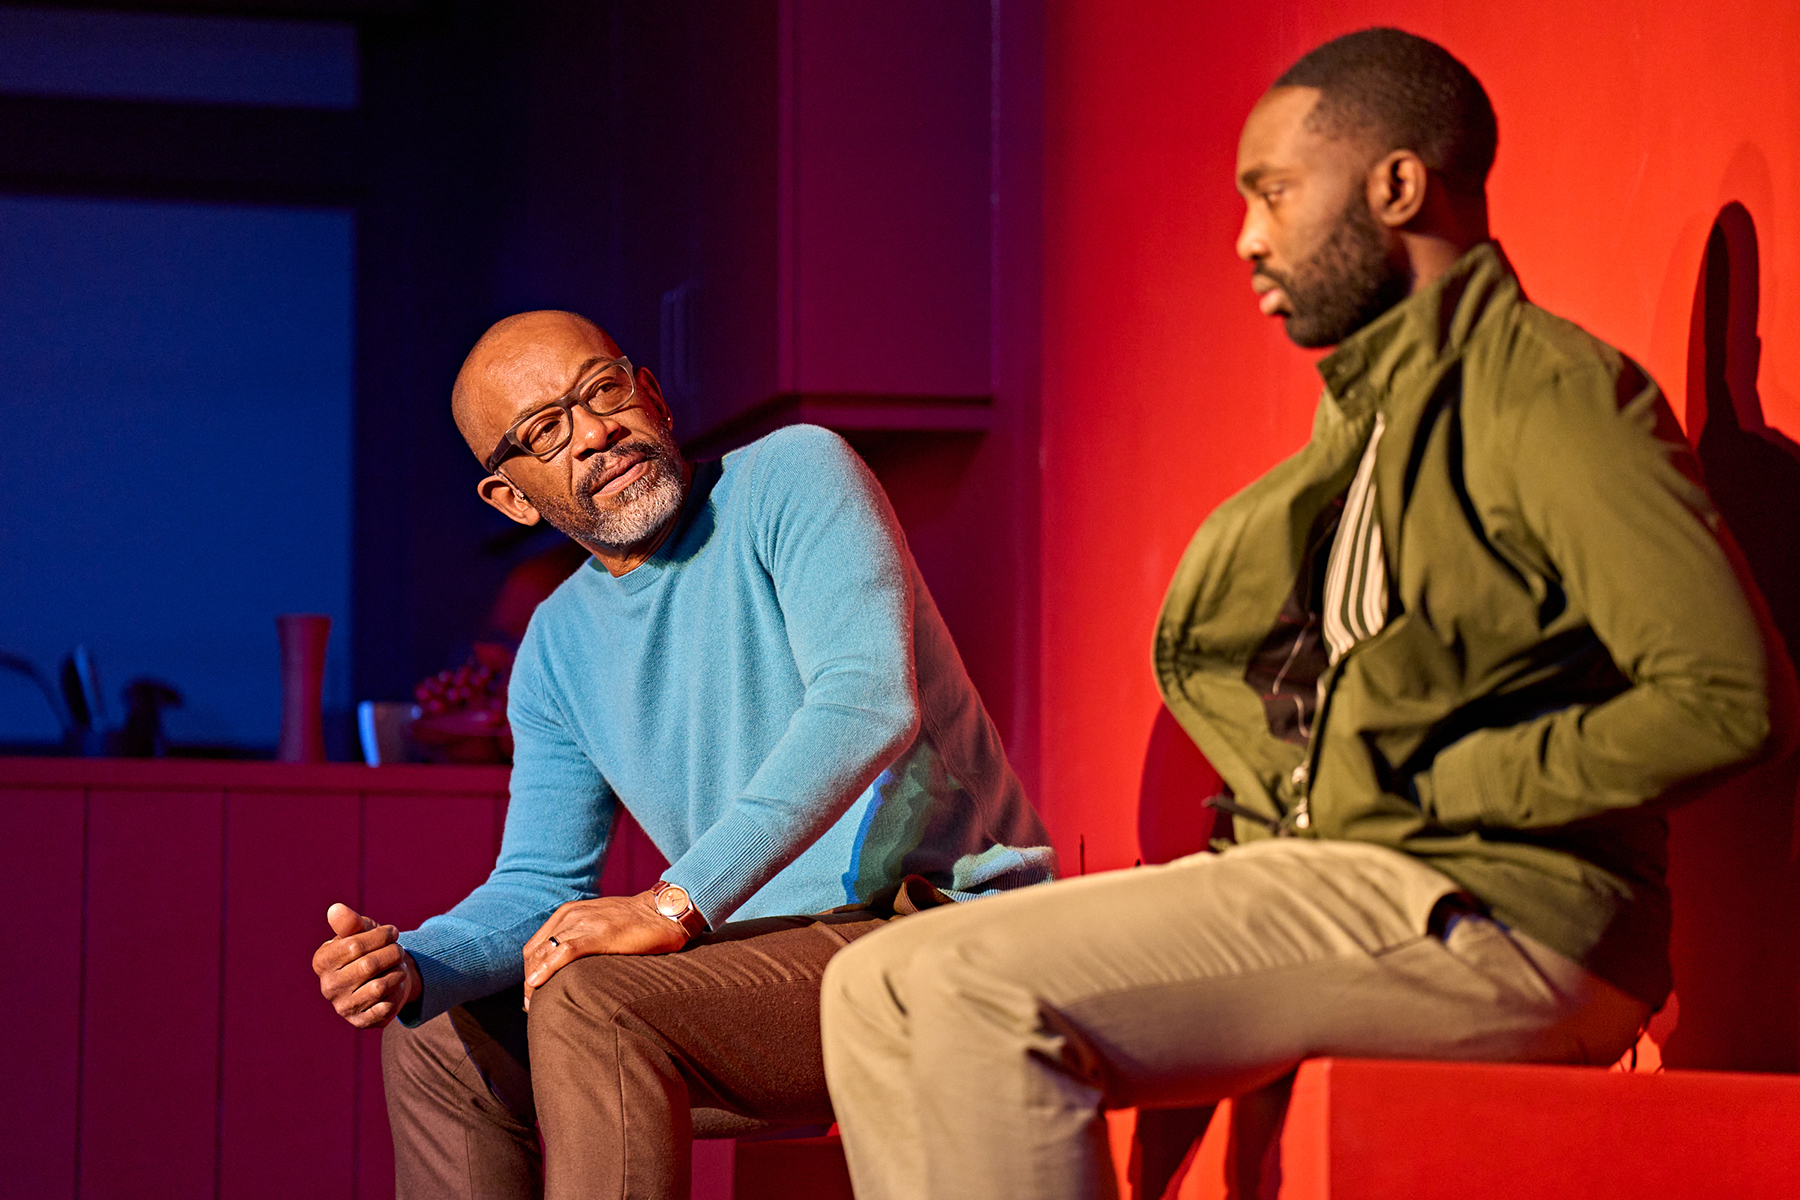 Lennie James and Paapa Essiedu in A Number at The Old Vic